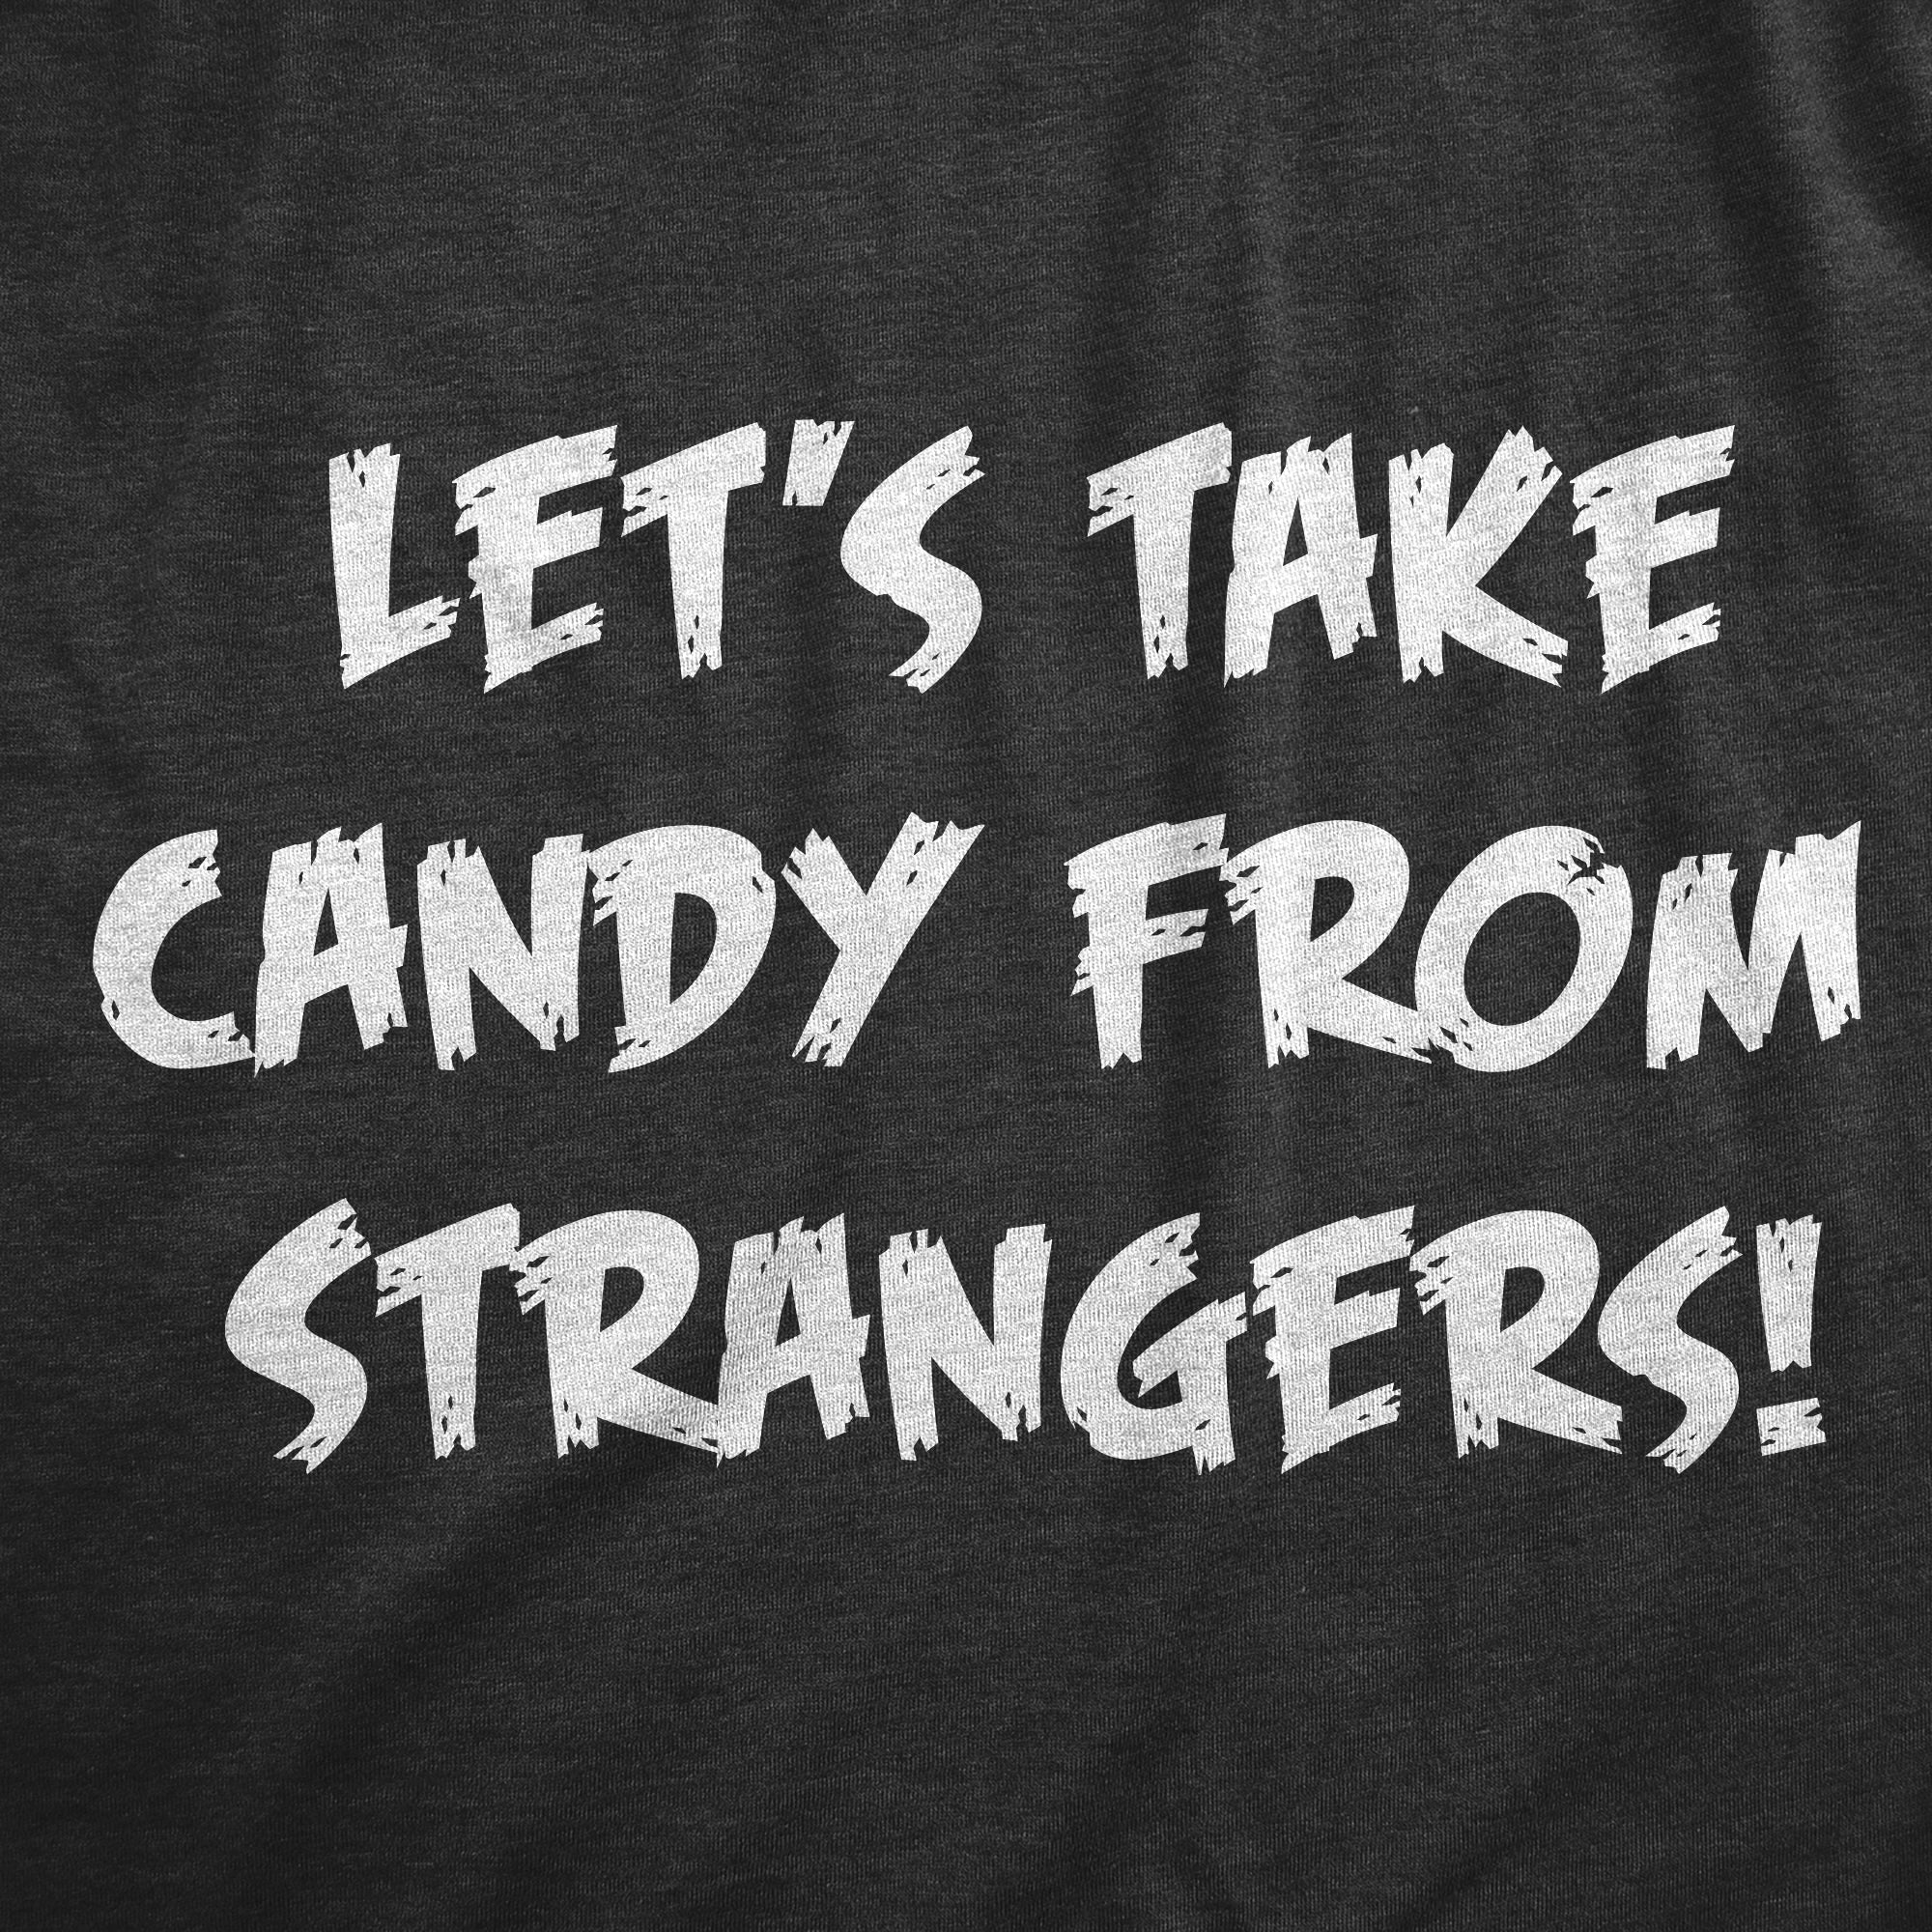 Funny Heather Black - CANDY Lets Take Candy From Strangers Womens T Shirt Nerdy Halloween Food sarcastic Tee